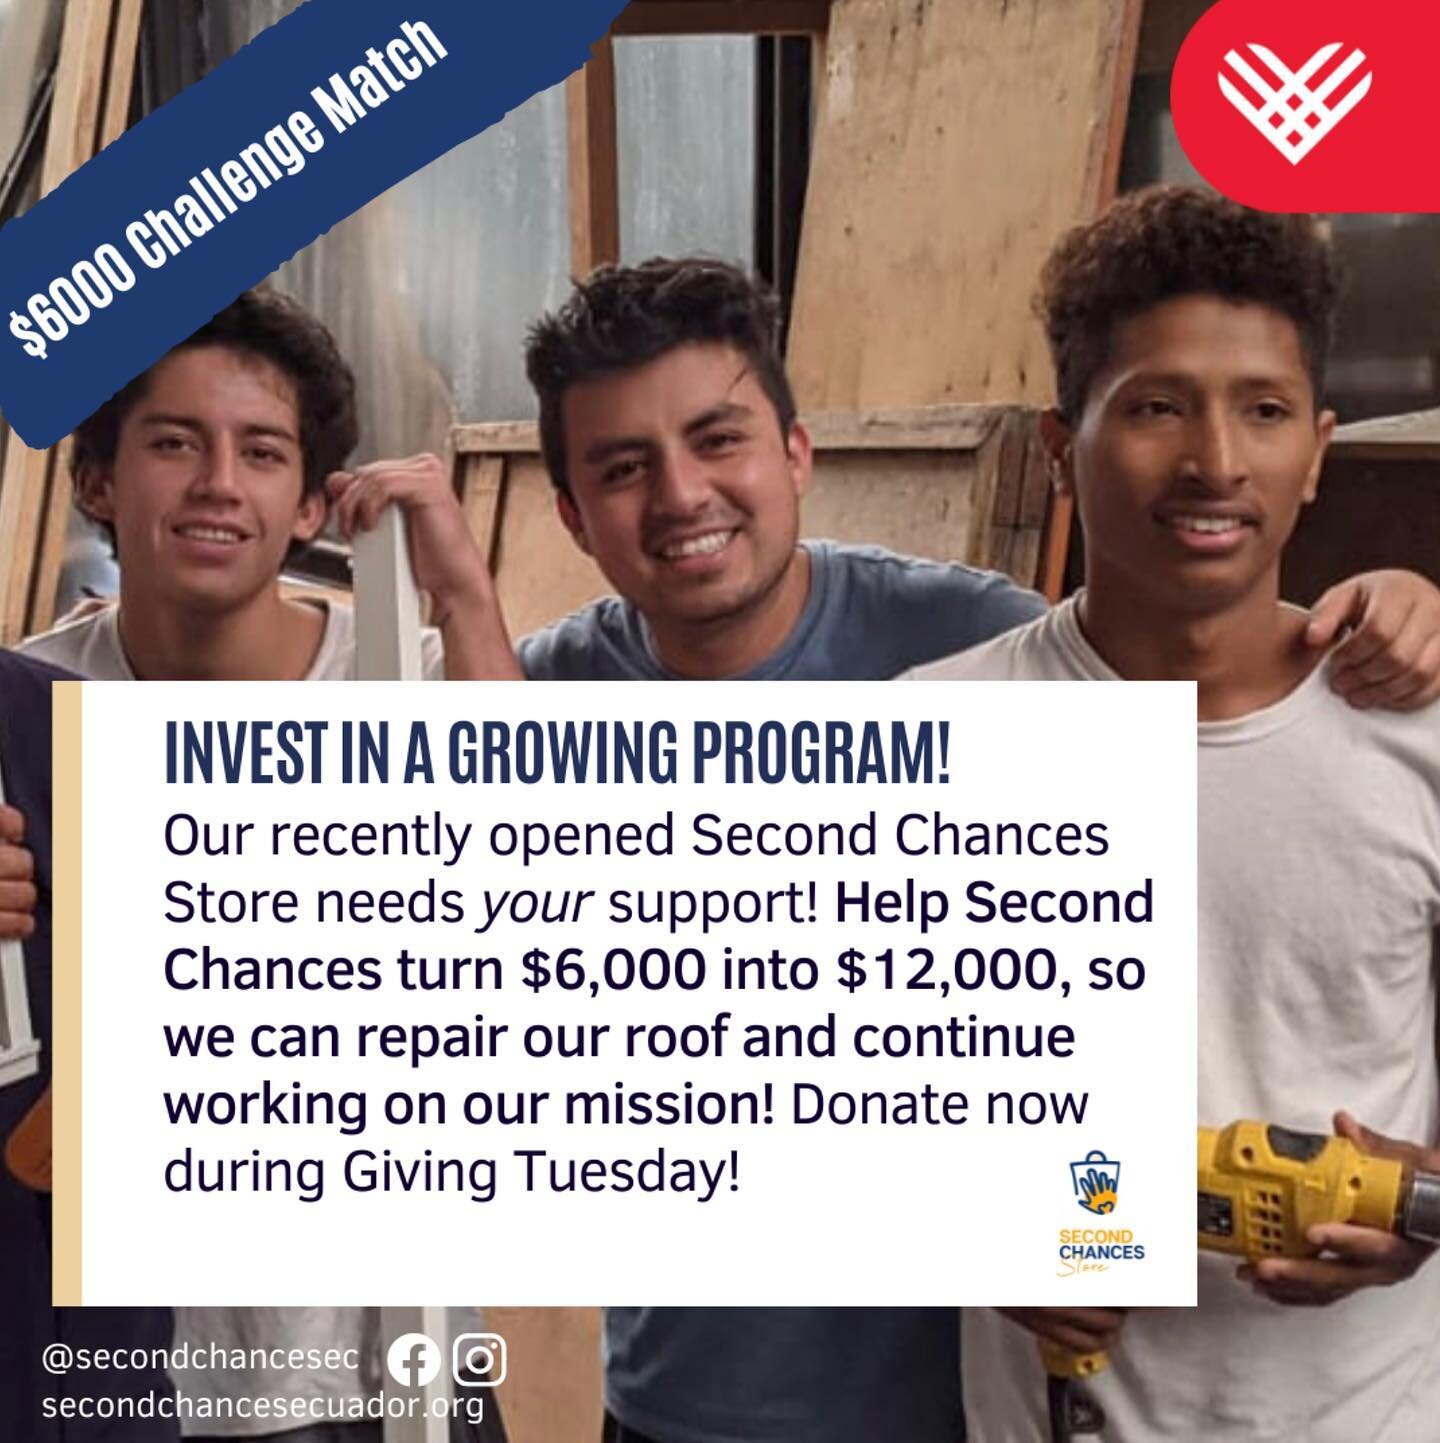 Professional Development impacts our community.  The recently opened Second Chances Store needs your support! Help Second Chances turn $6,000 into $12,000, so we can repair the roof of the store and continue working on our mission! Donate now - https